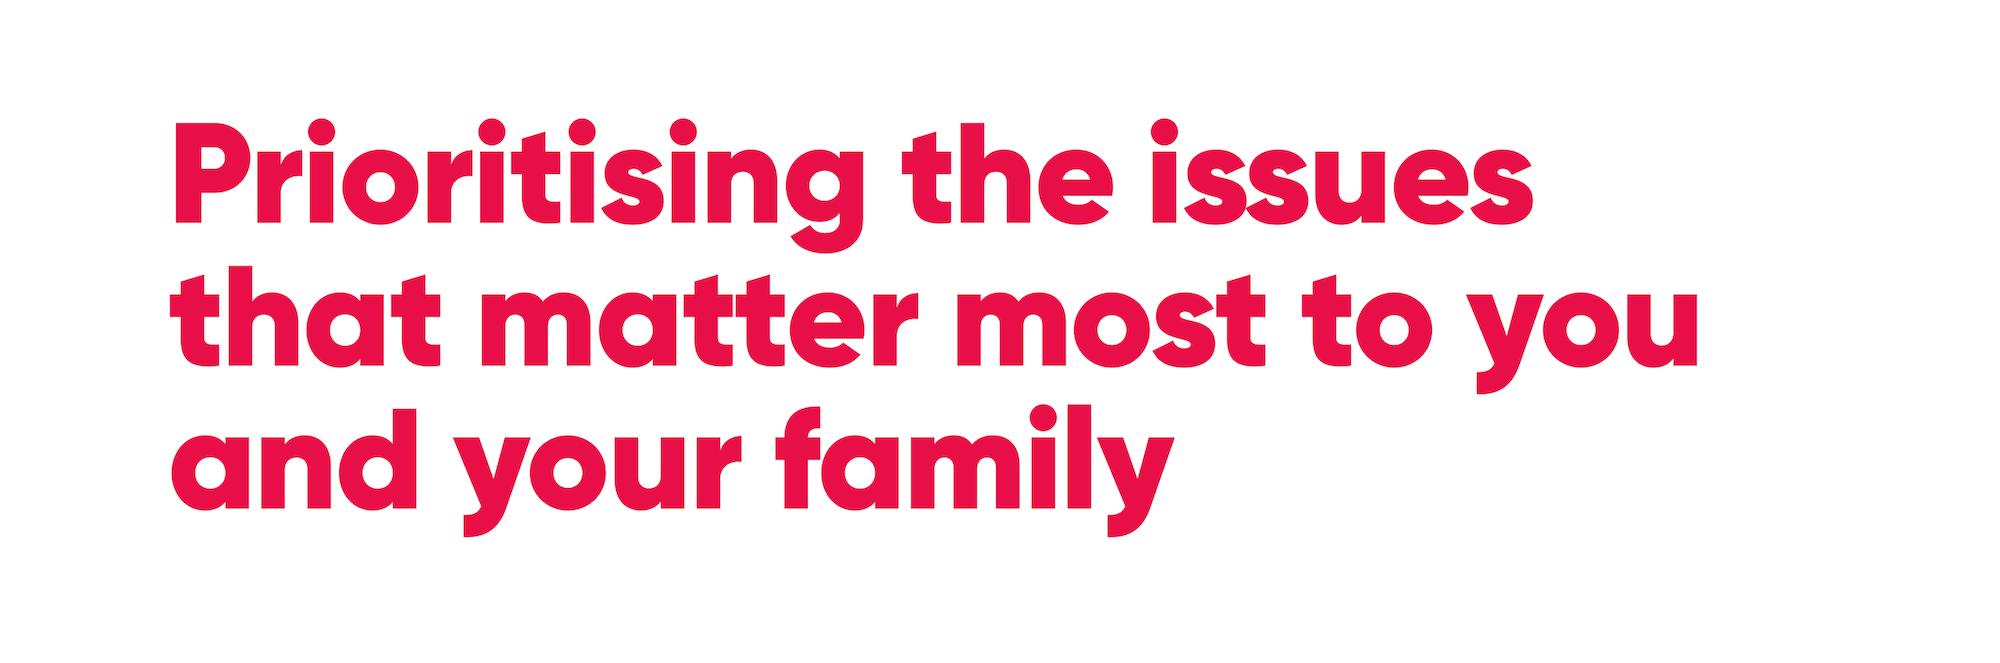 Prioritising the issues that matter most to you and your family